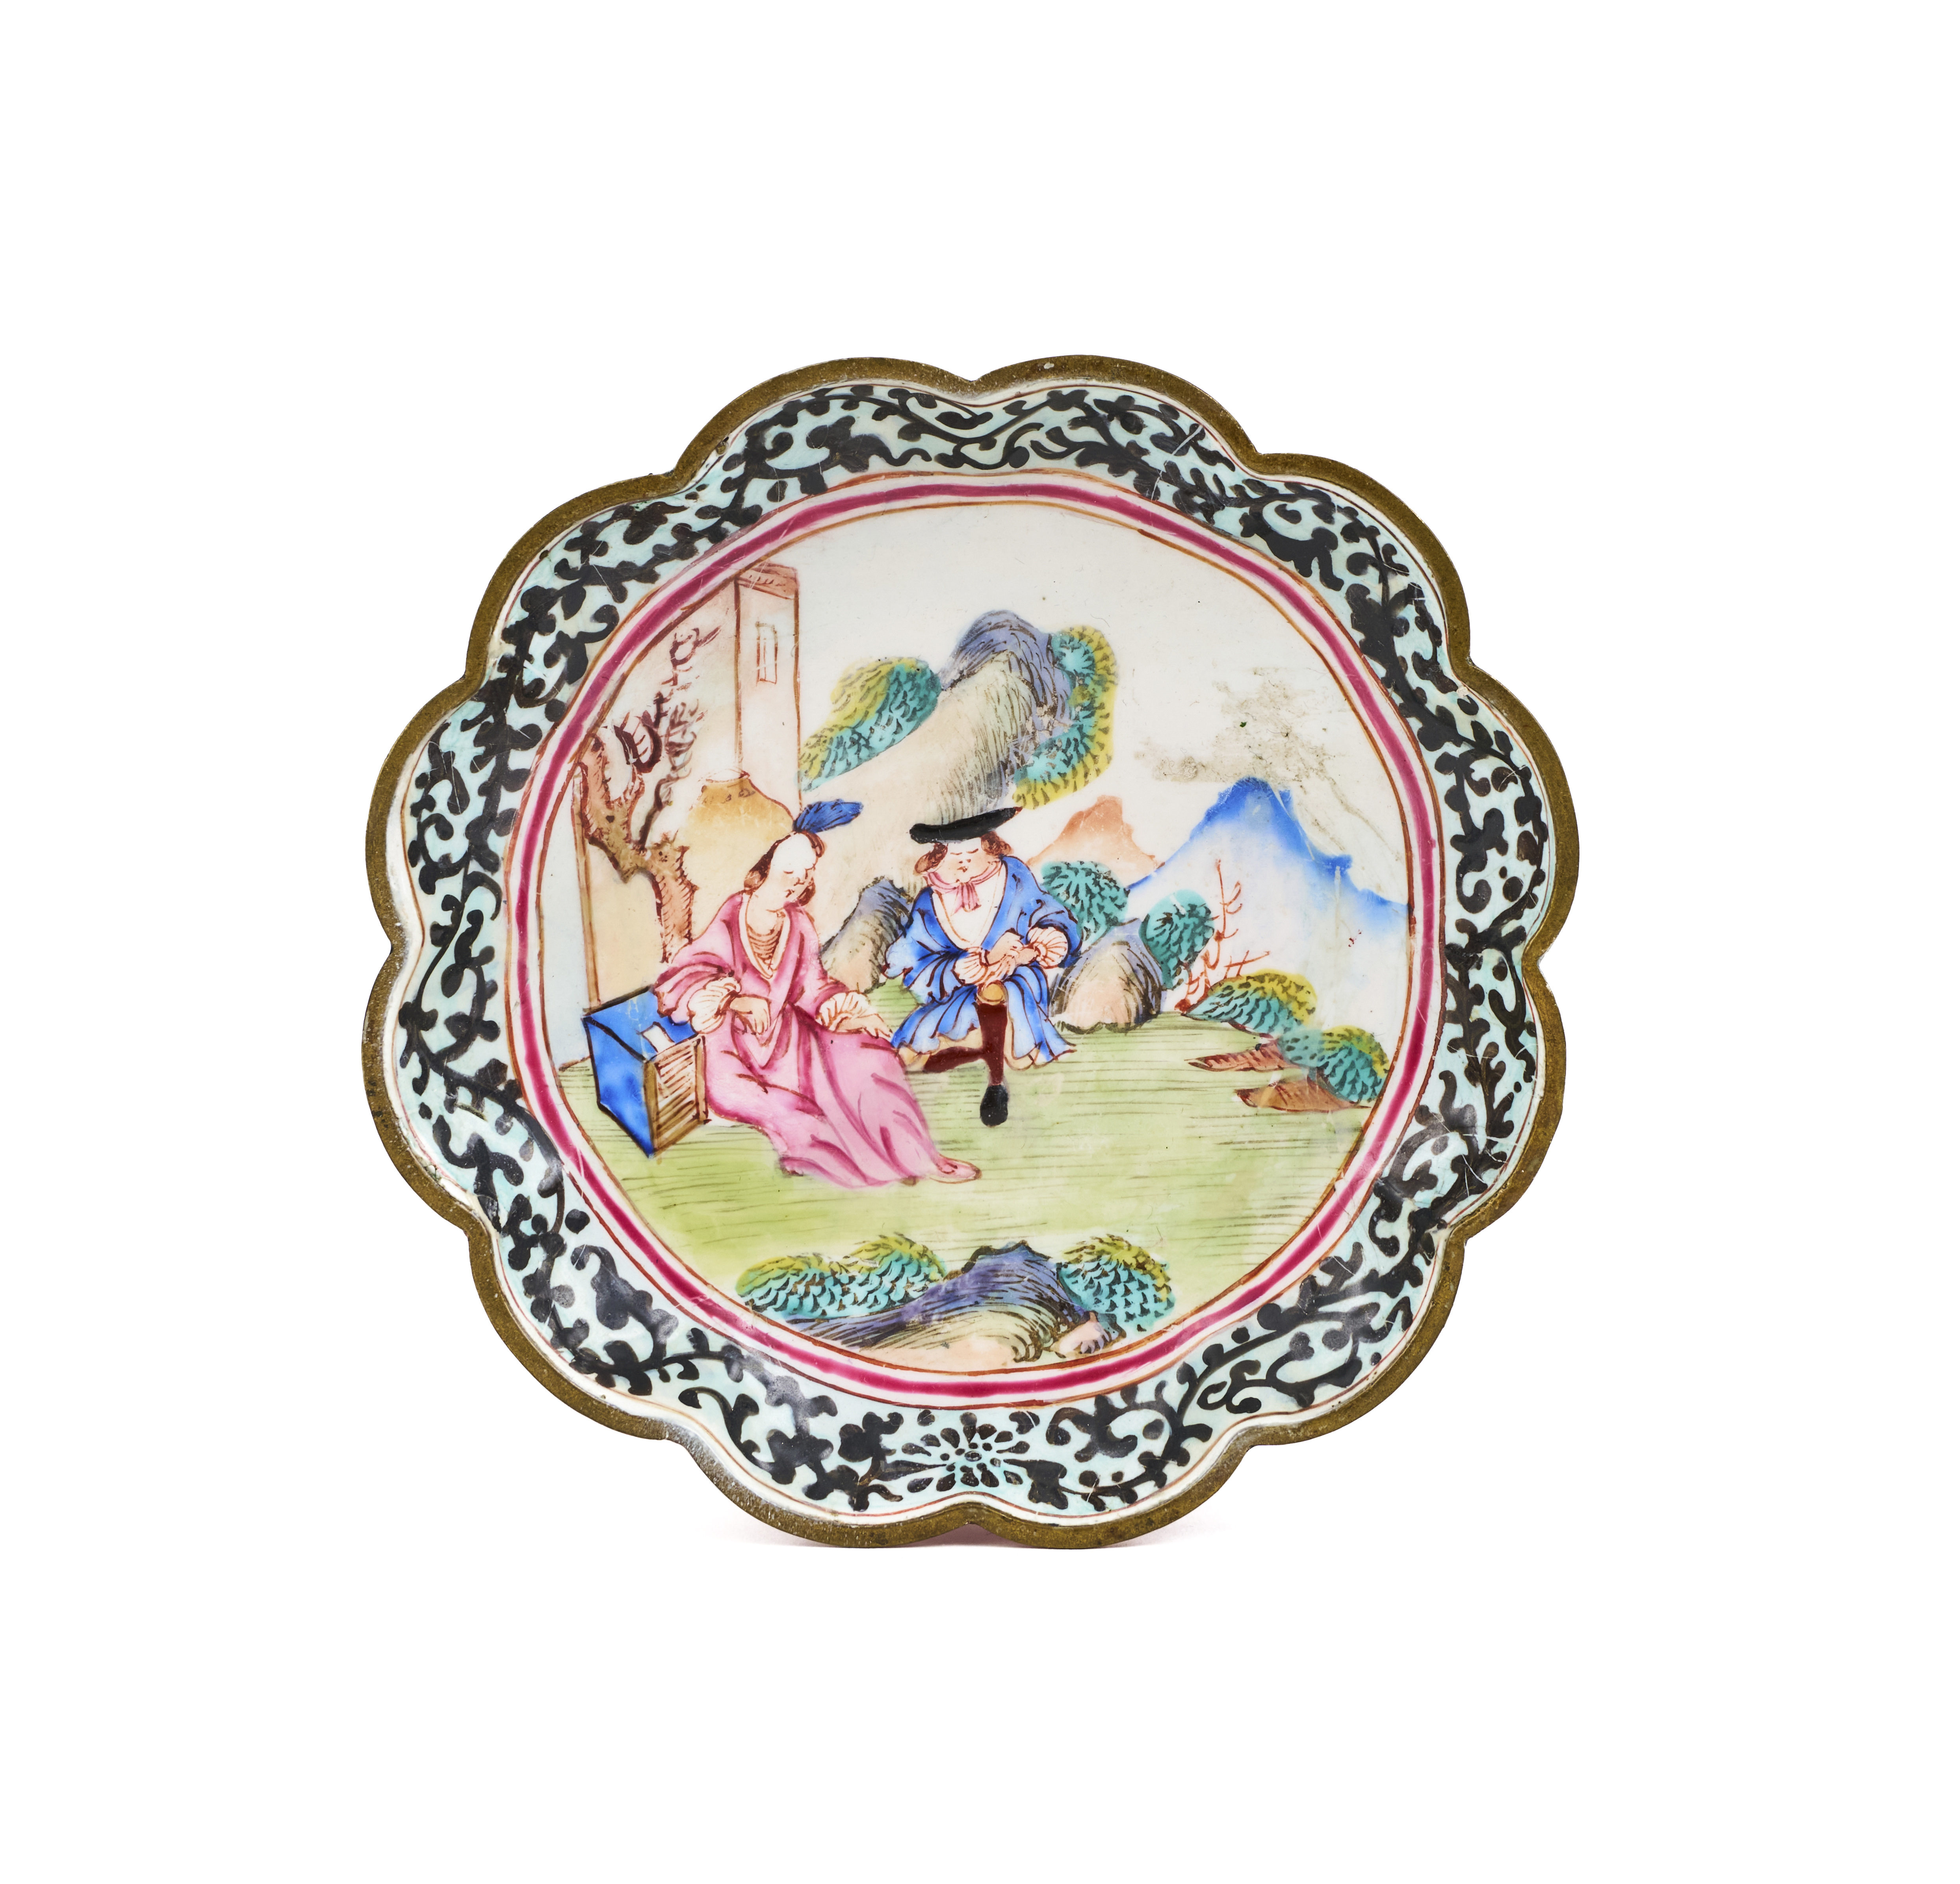 ASSORTMENT OF CHINESE CANTON ENAMEL OBJECTS, 18TH/19TH CENTURY - Image 5 of 6